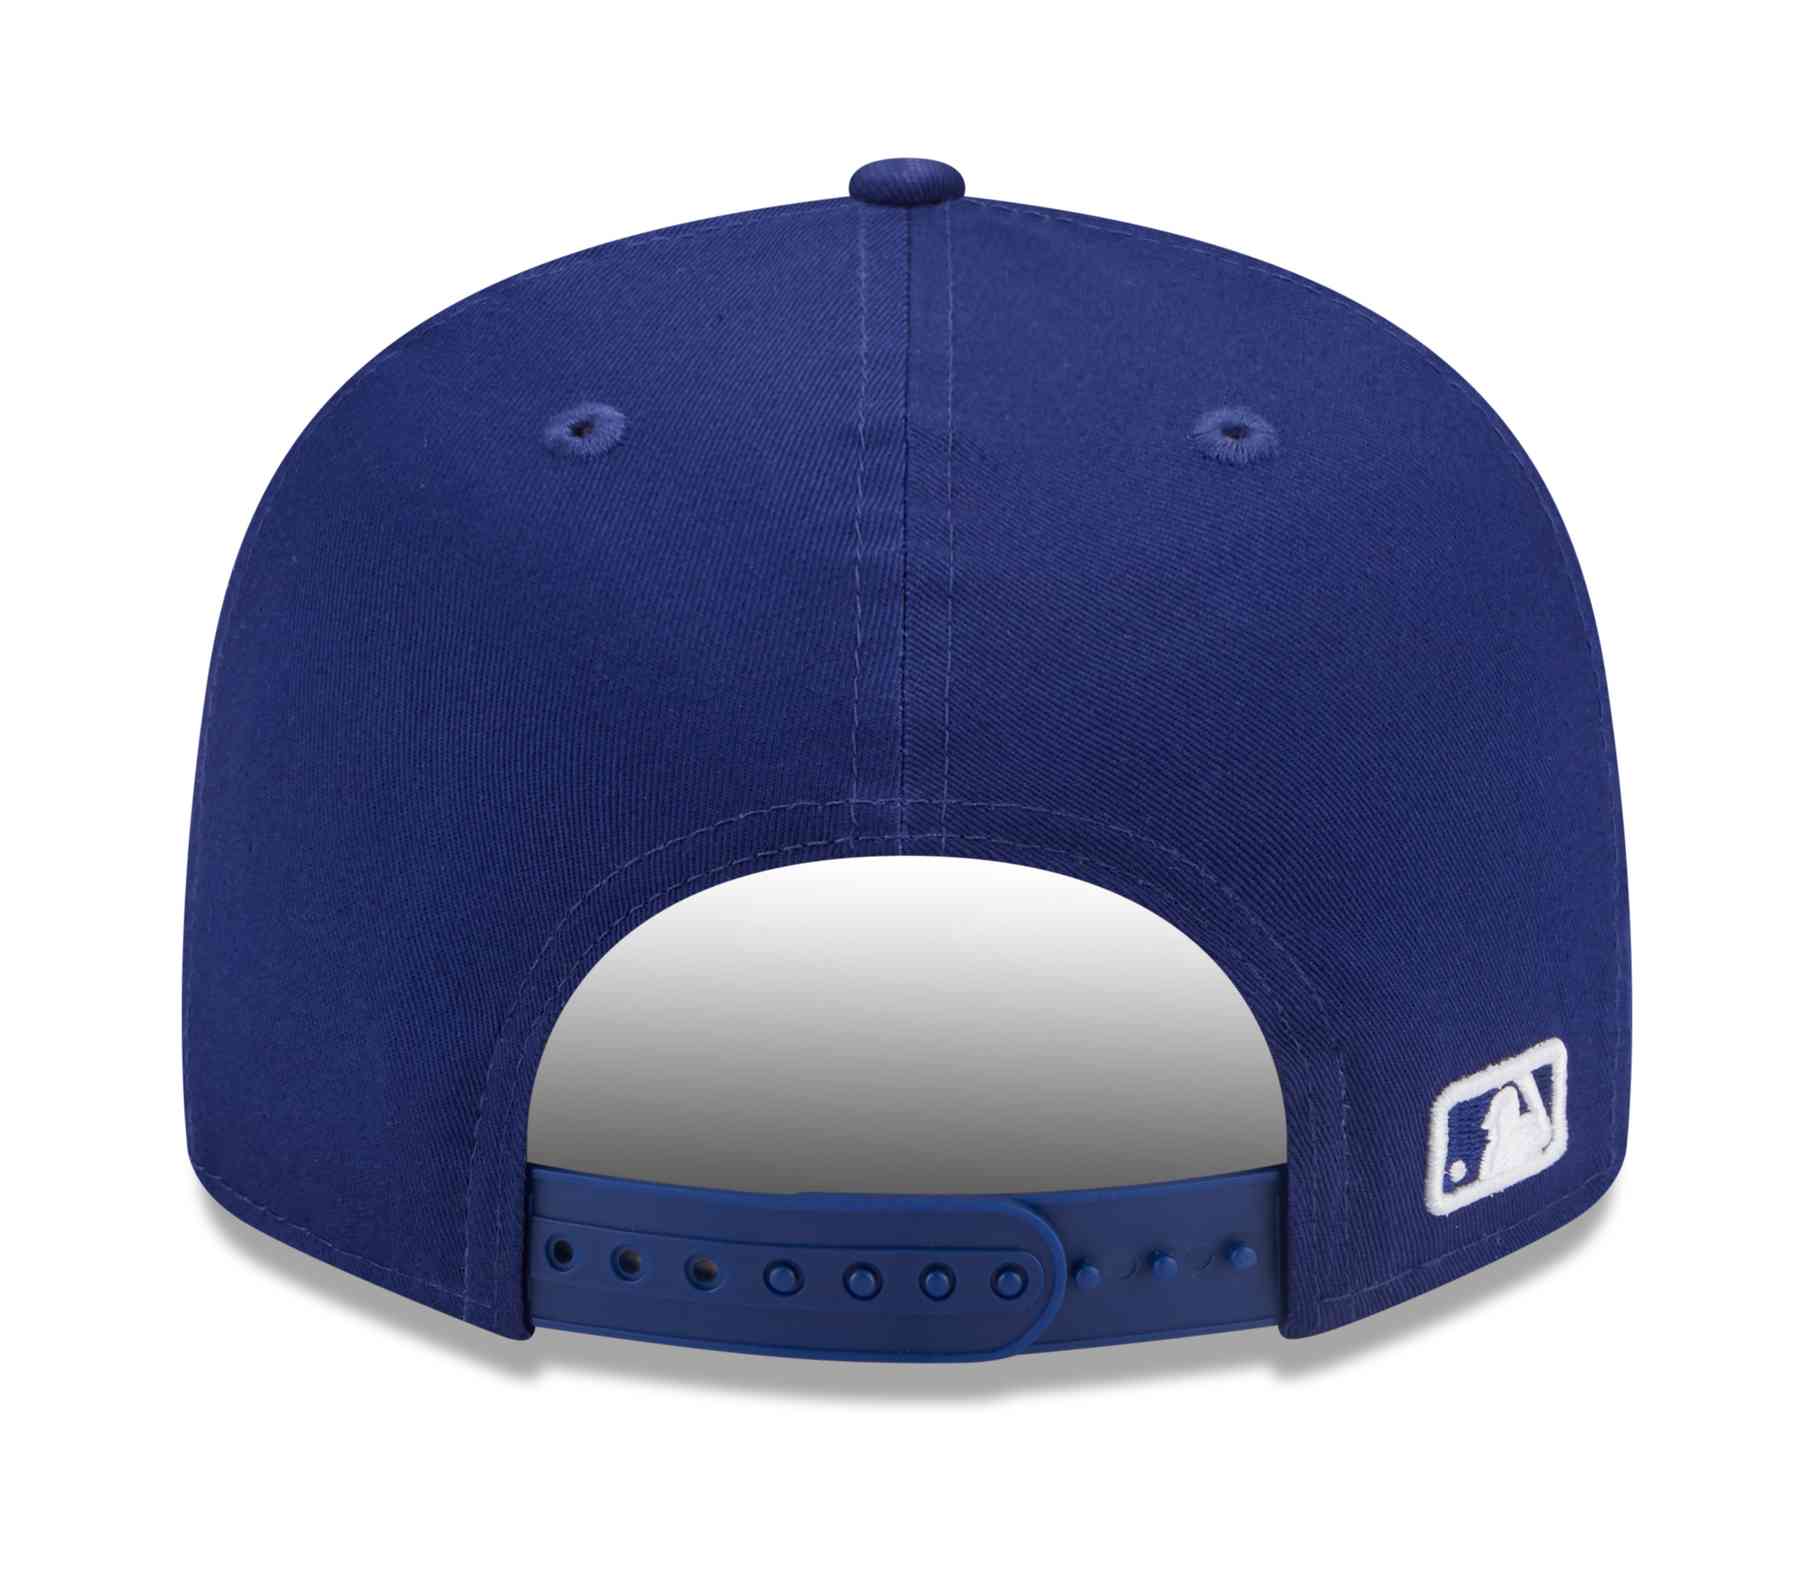 New Era - MLB Los Angeles Dodgers Contrast Side Patch 9Fifty Snapback Cap